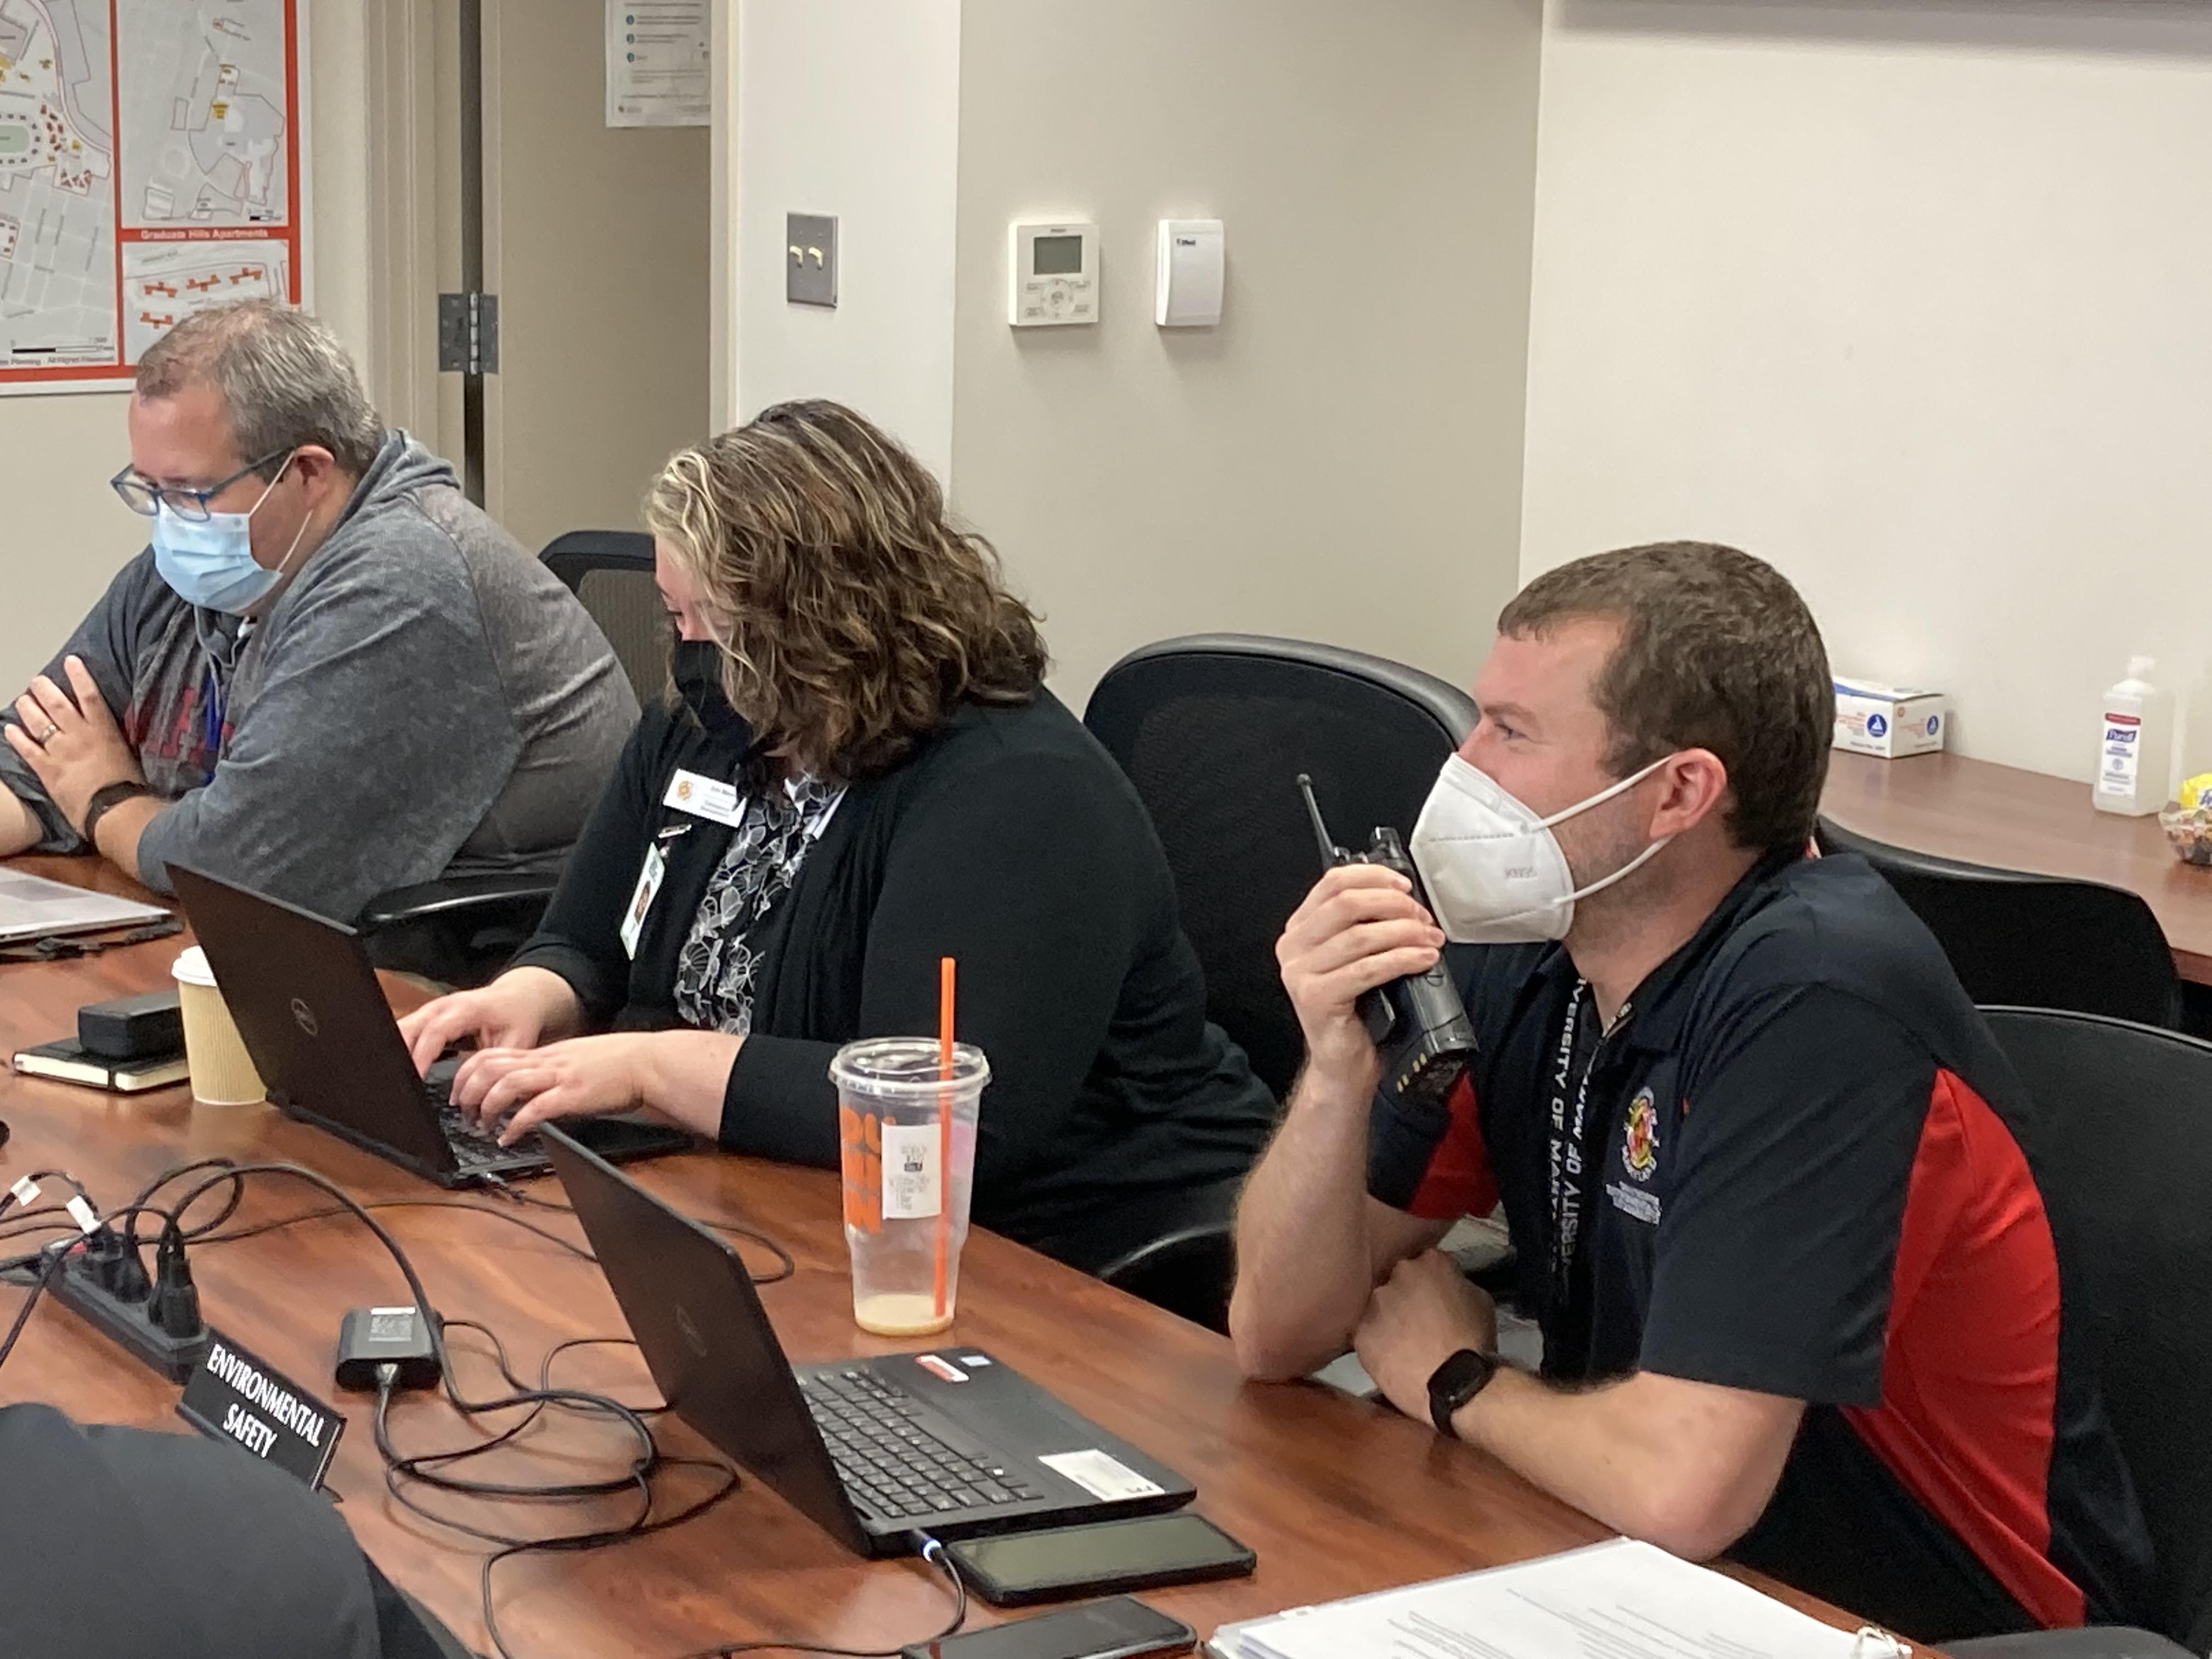 Three Office of Emergency Management and Business Center staff in masks sitting at a conference table